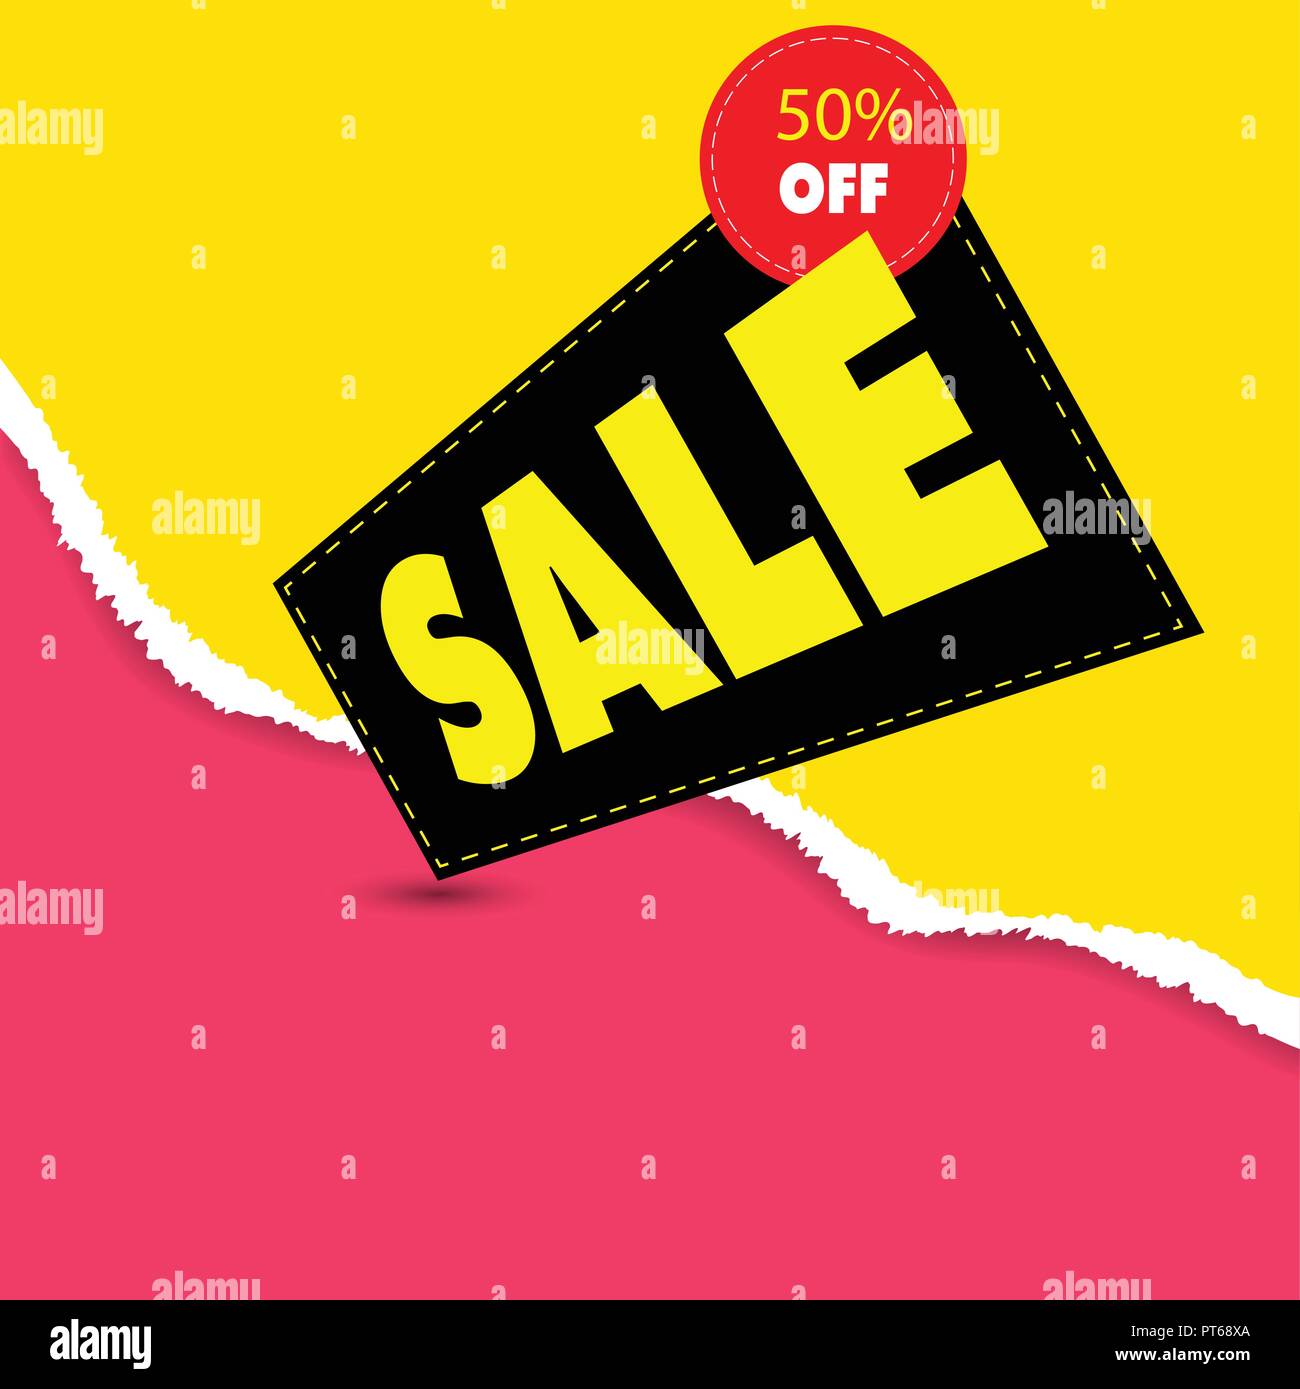 The paper was ripped background and discount 50 percent off label in flat style. Vector illustration. Stock Vector